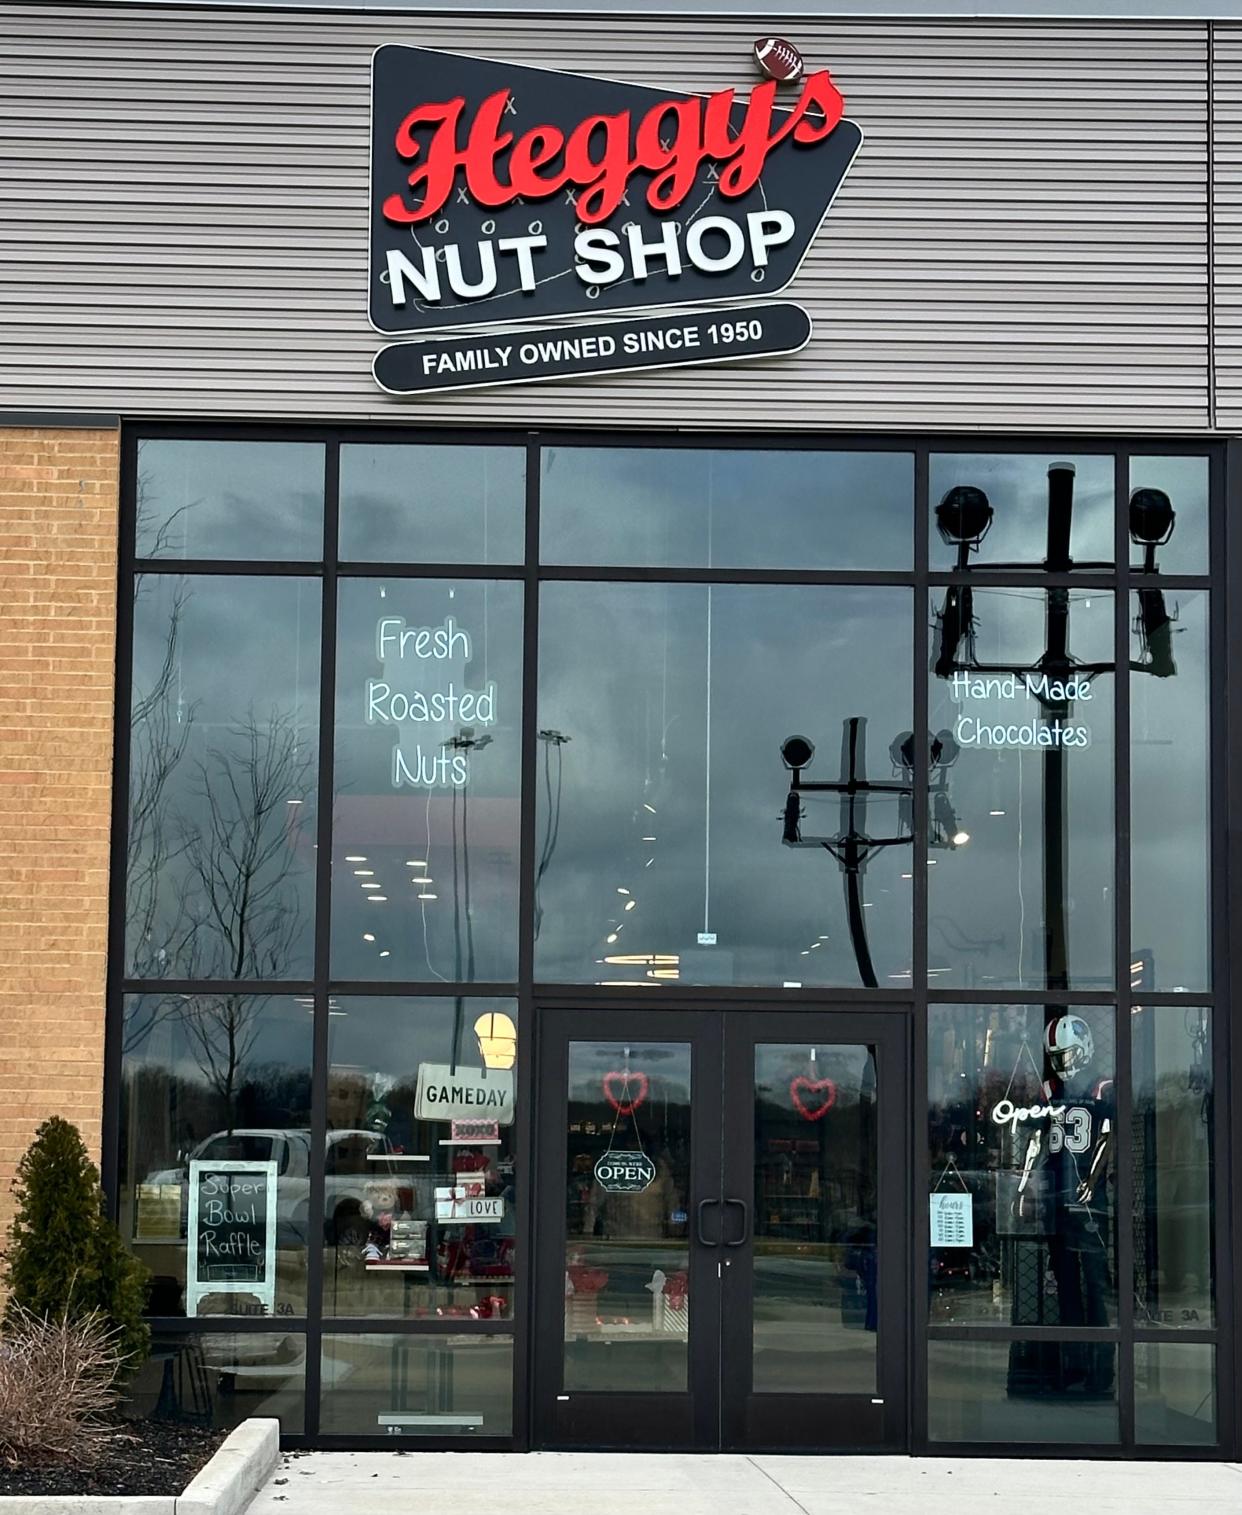 Heggy's Nut Shop has opened its location in the Fan Engagement Zone at Hall of Fame Village.